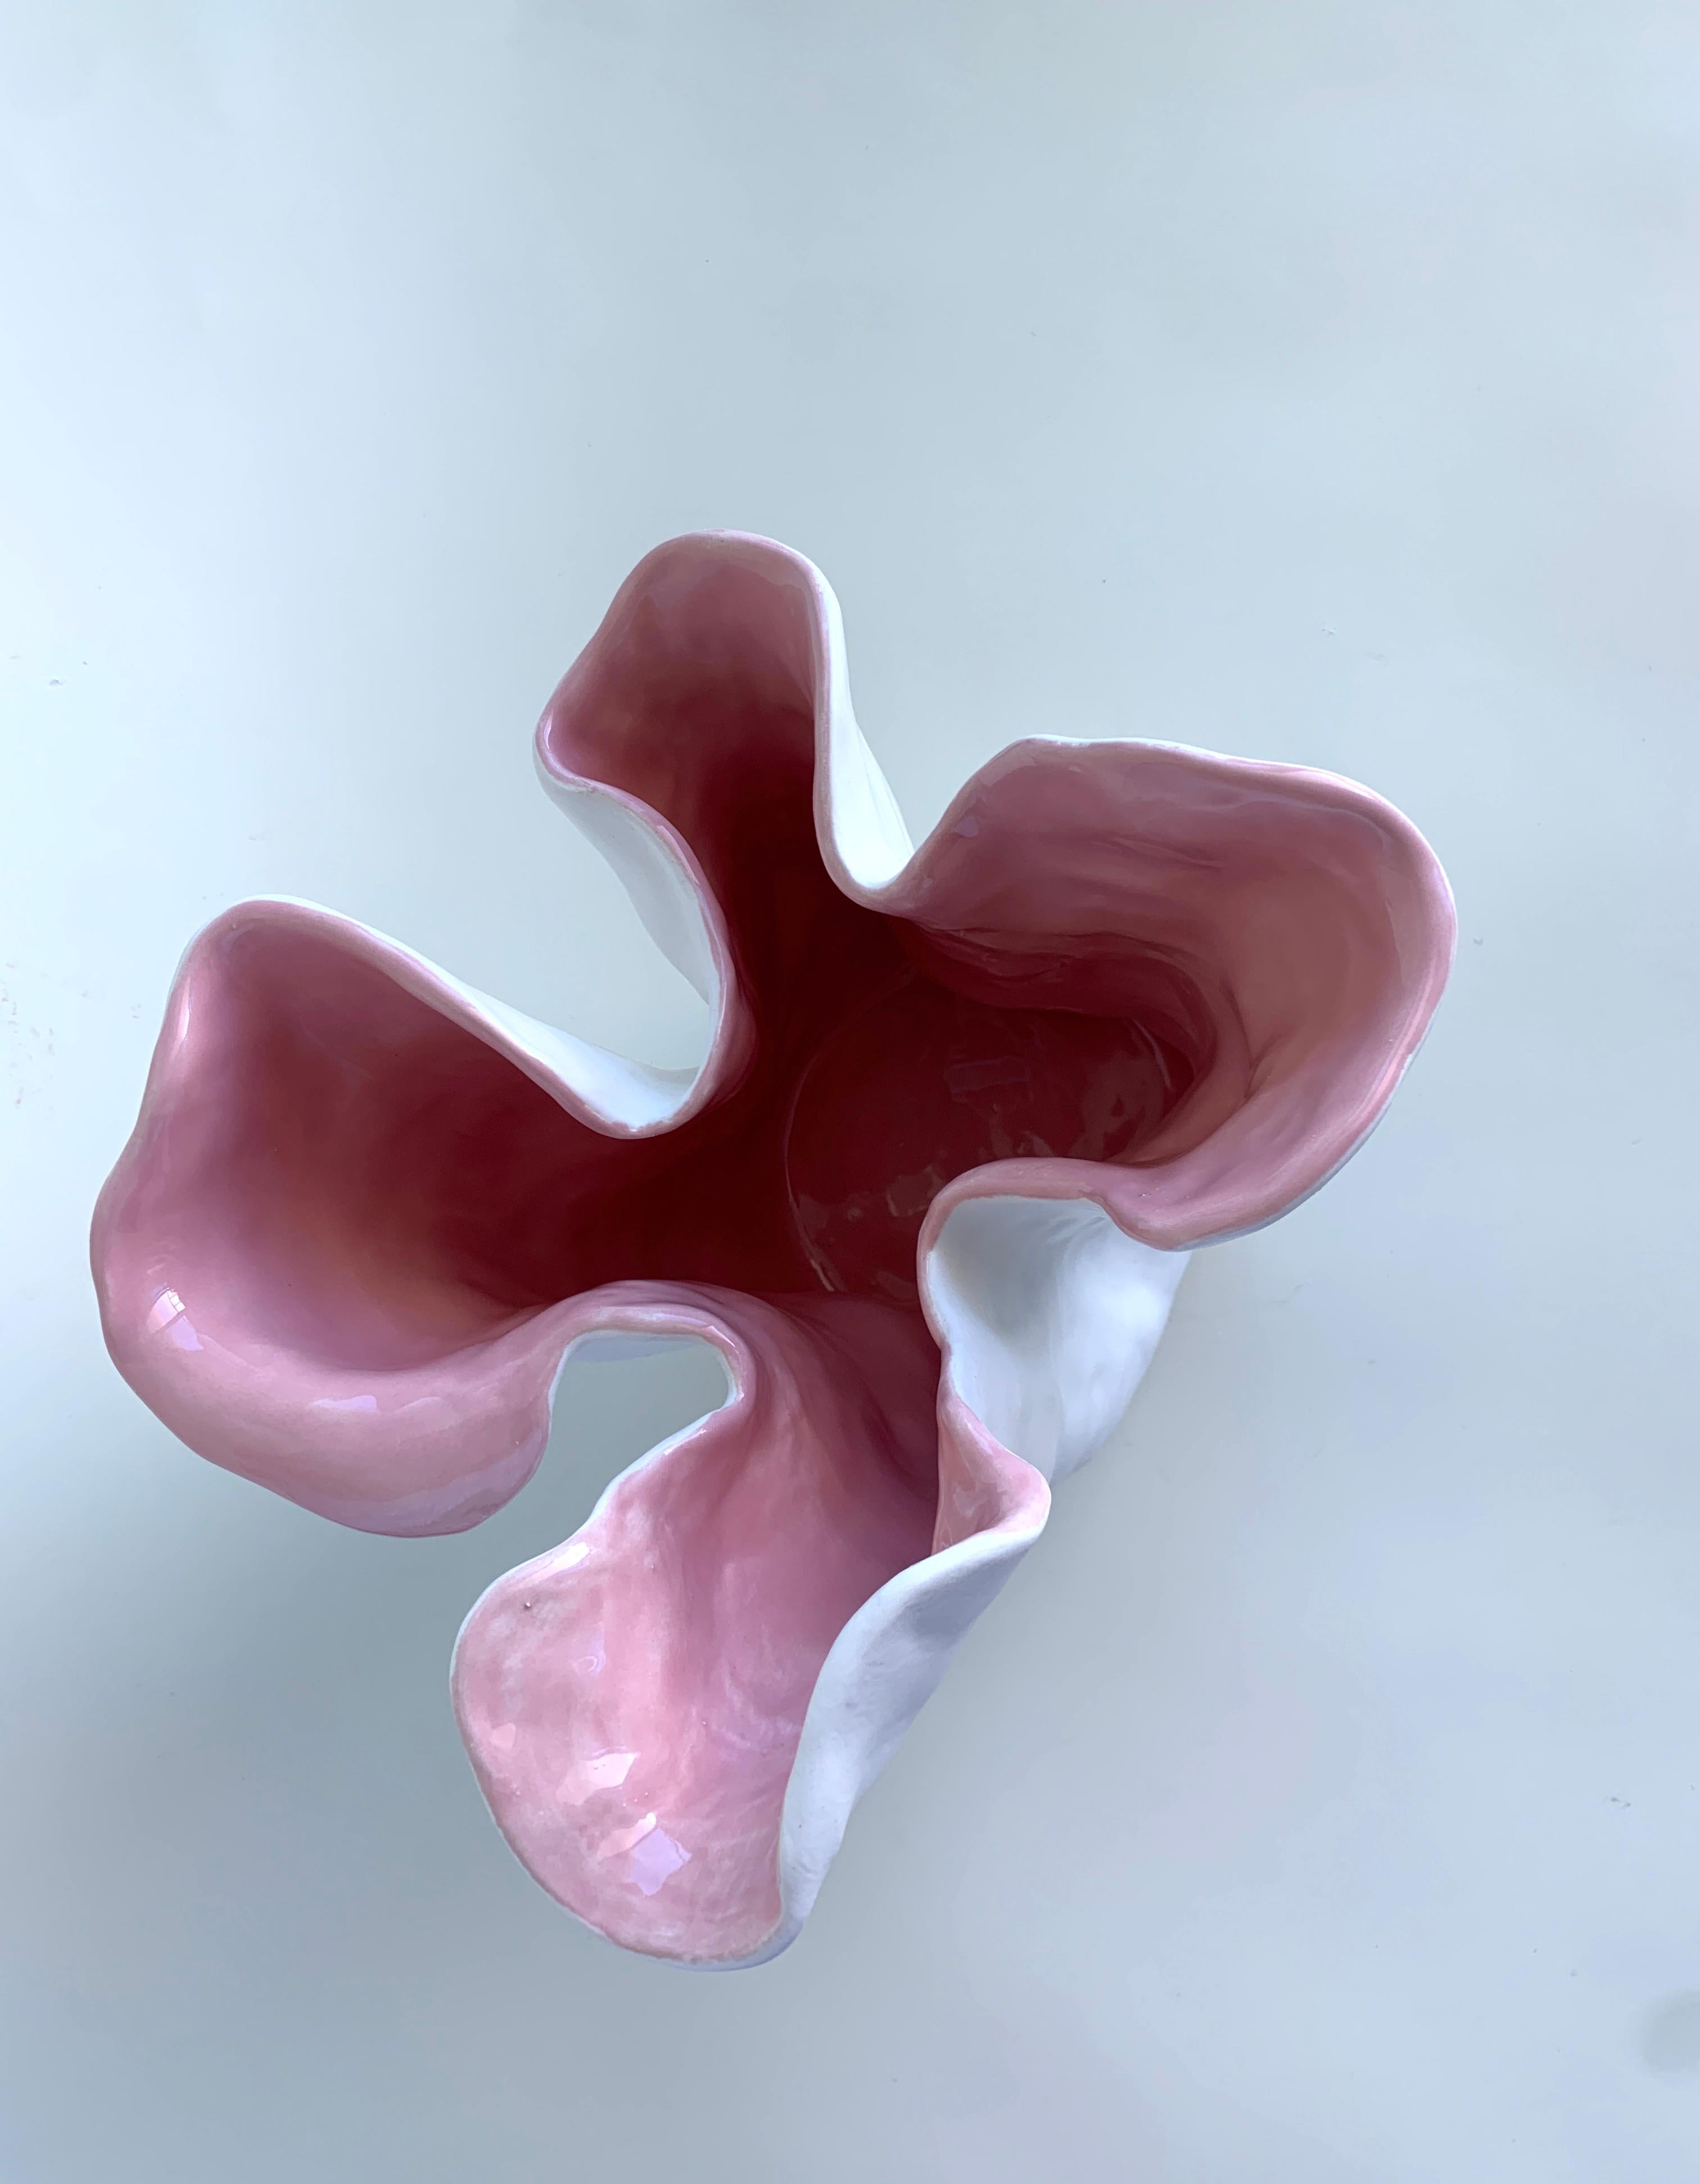 Visceral Blush I, 2020 by Magda von Hanau
From The Series Visceral 
Clay Sculpture with Glass Glaze
Dimensions: 30.4 H x 33 W cm 

The Visceral series delves into the intricate relationship between the mind and the body, specifically focusing on the